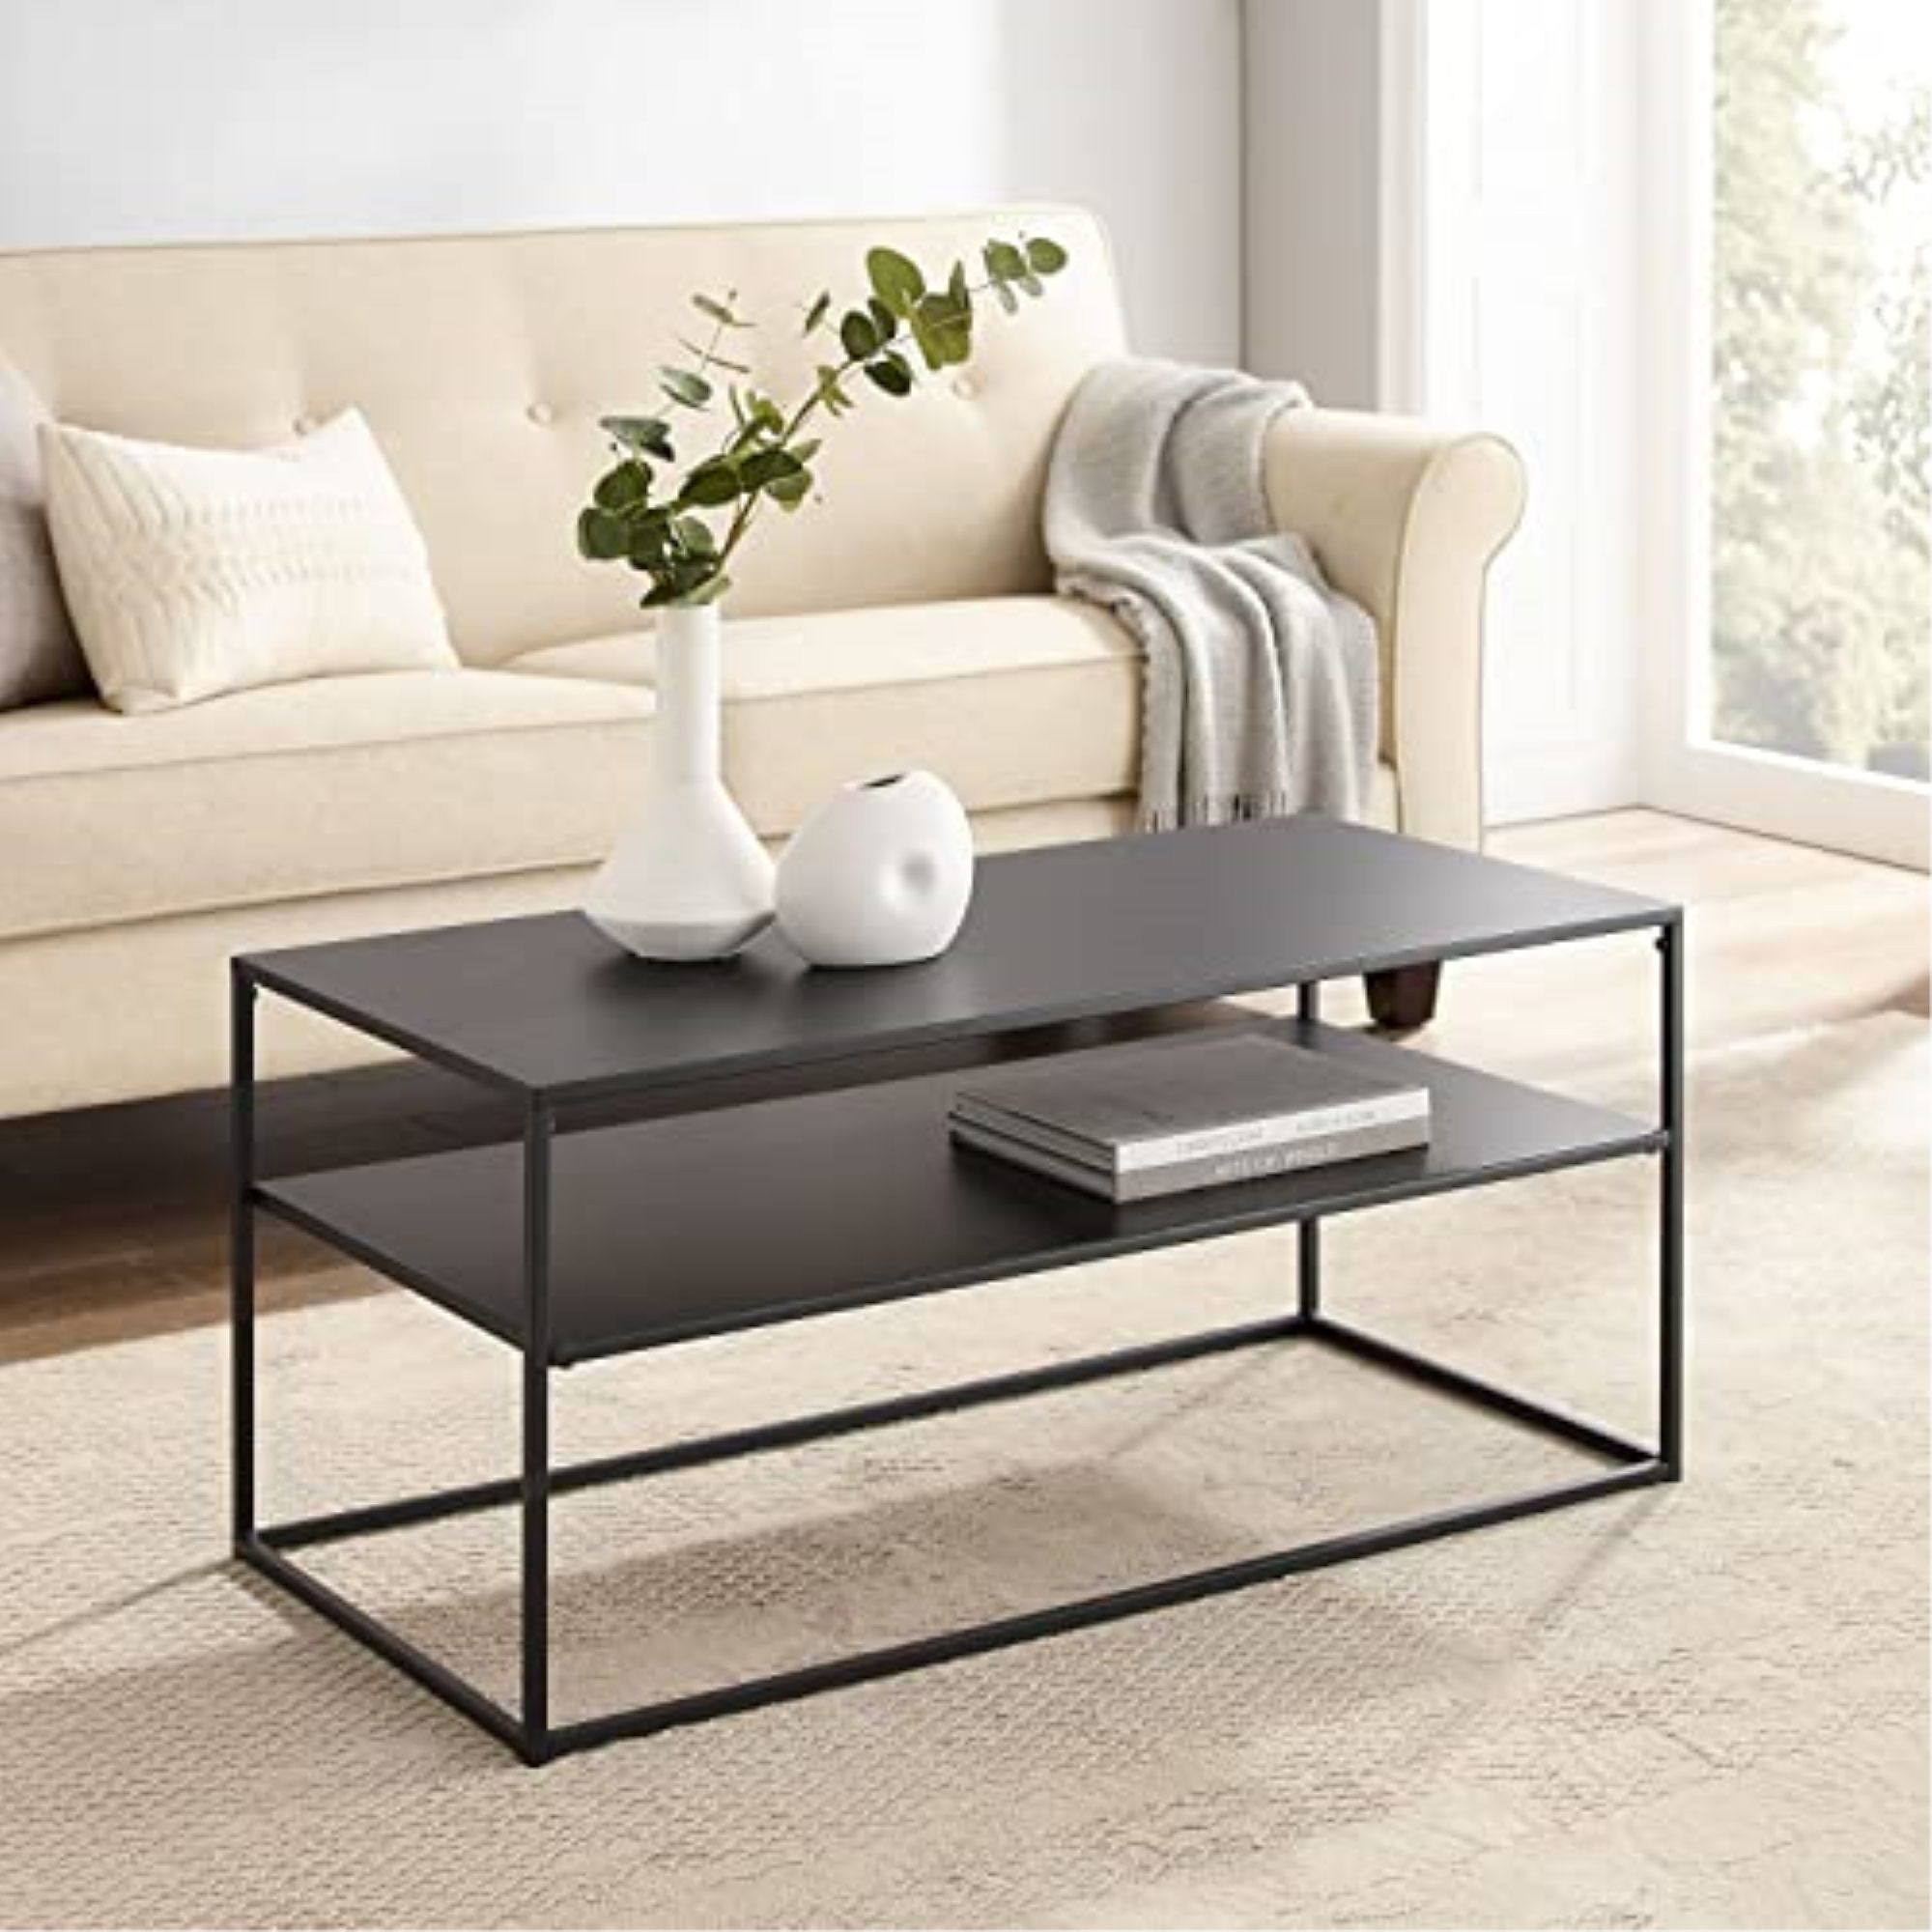 Crosley Furniture Braxton Coffee Table In Matte Black – Walmart Throughout Matte Coffee Tables (View 4 of 20)